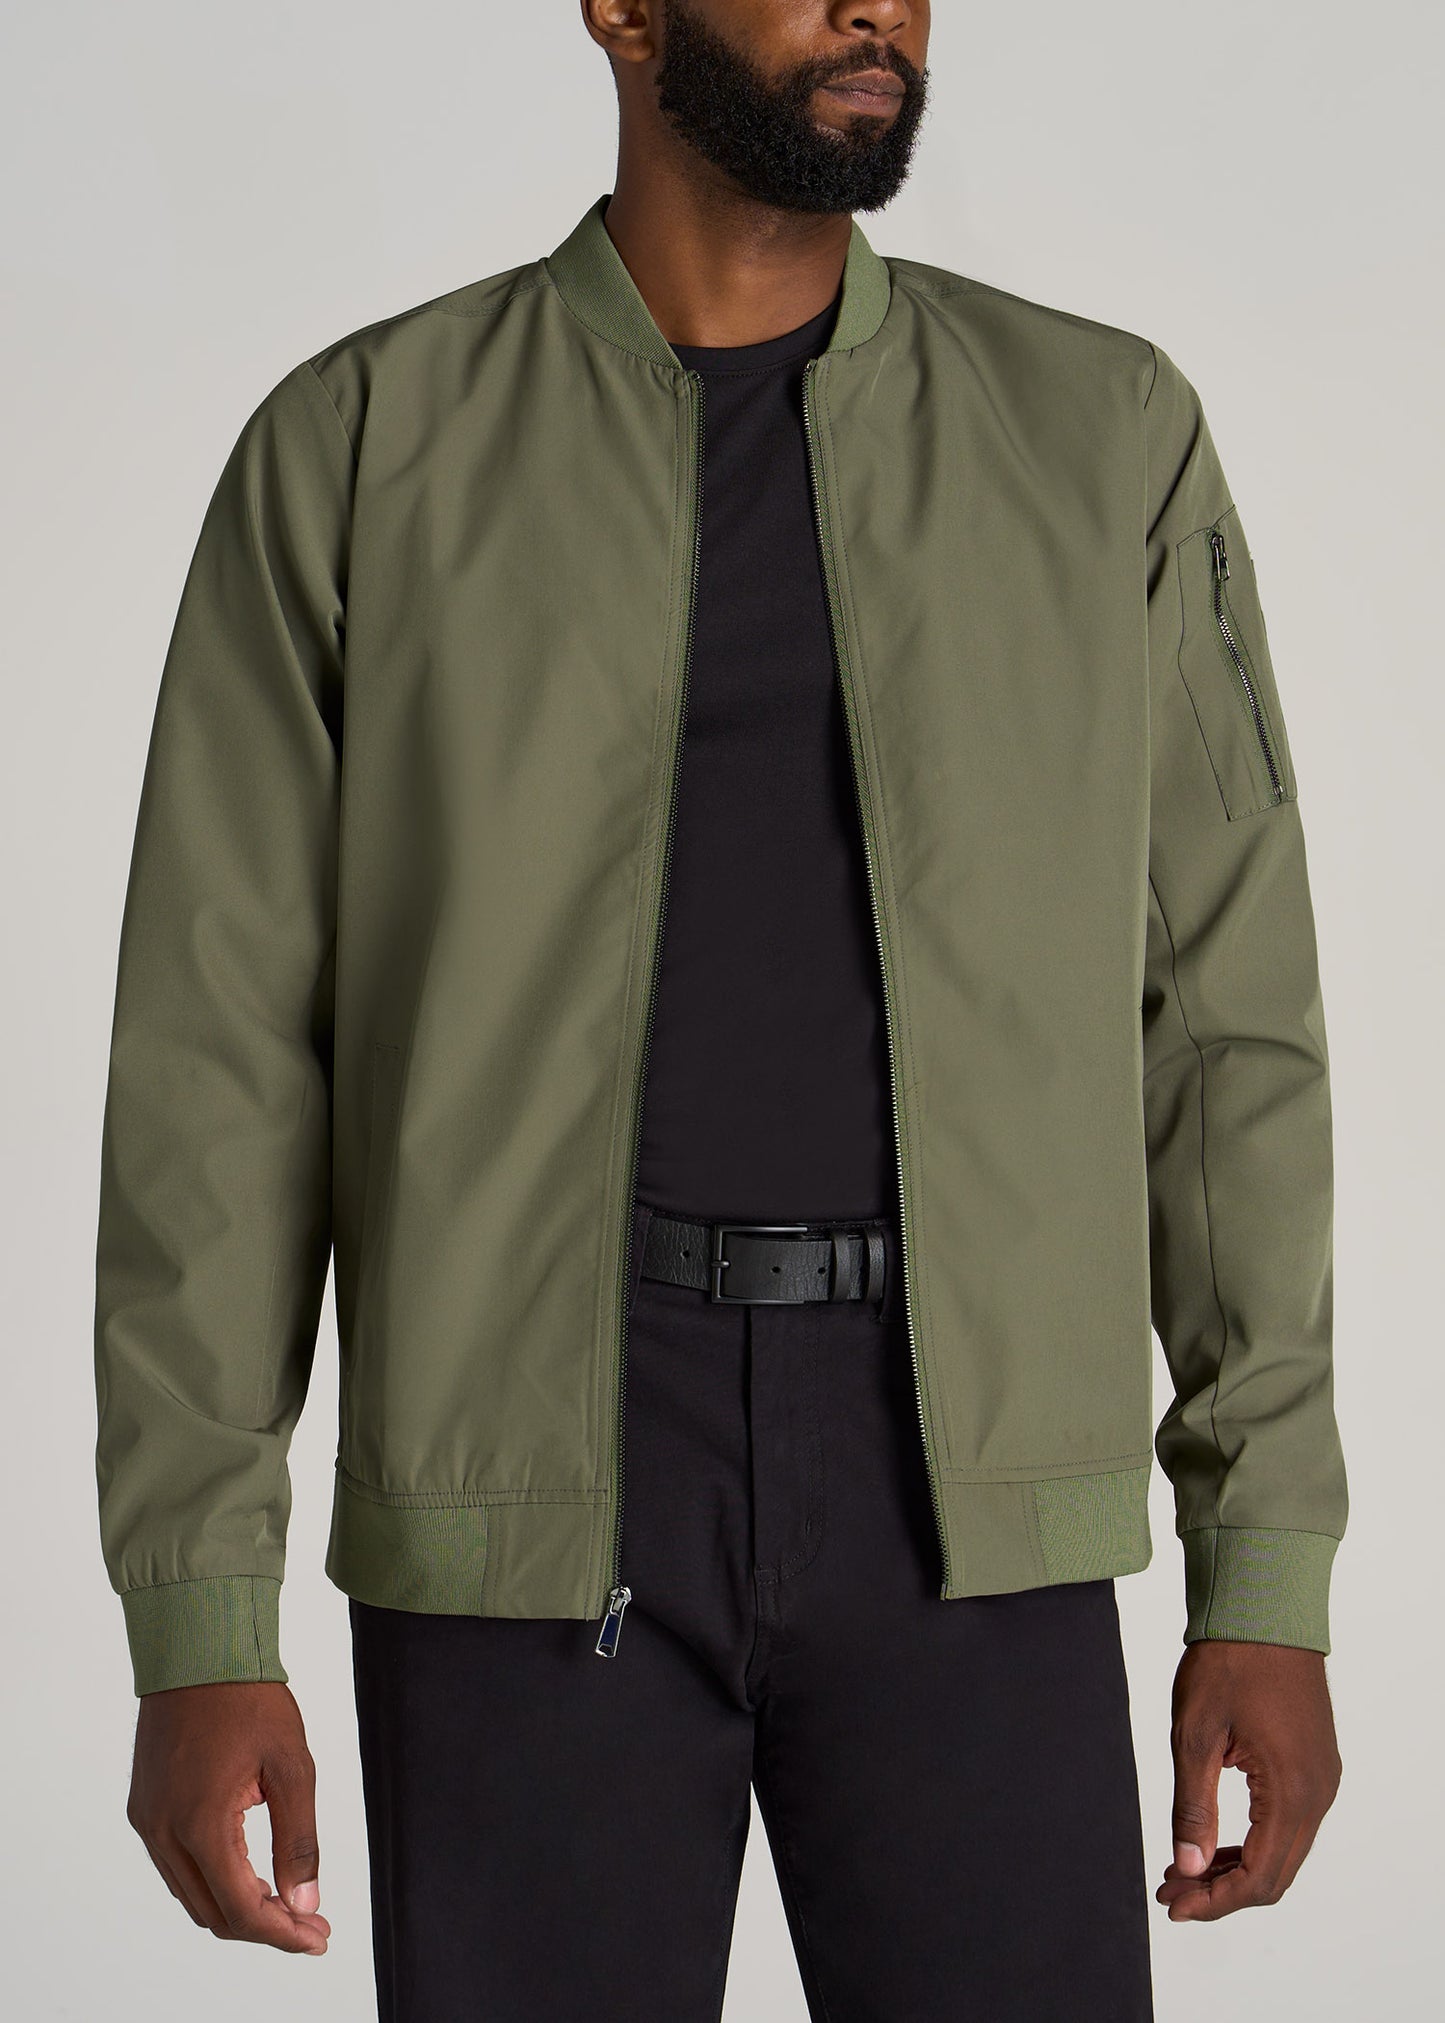       American-Tall-Men-Bomber-Jacket-Olive-front